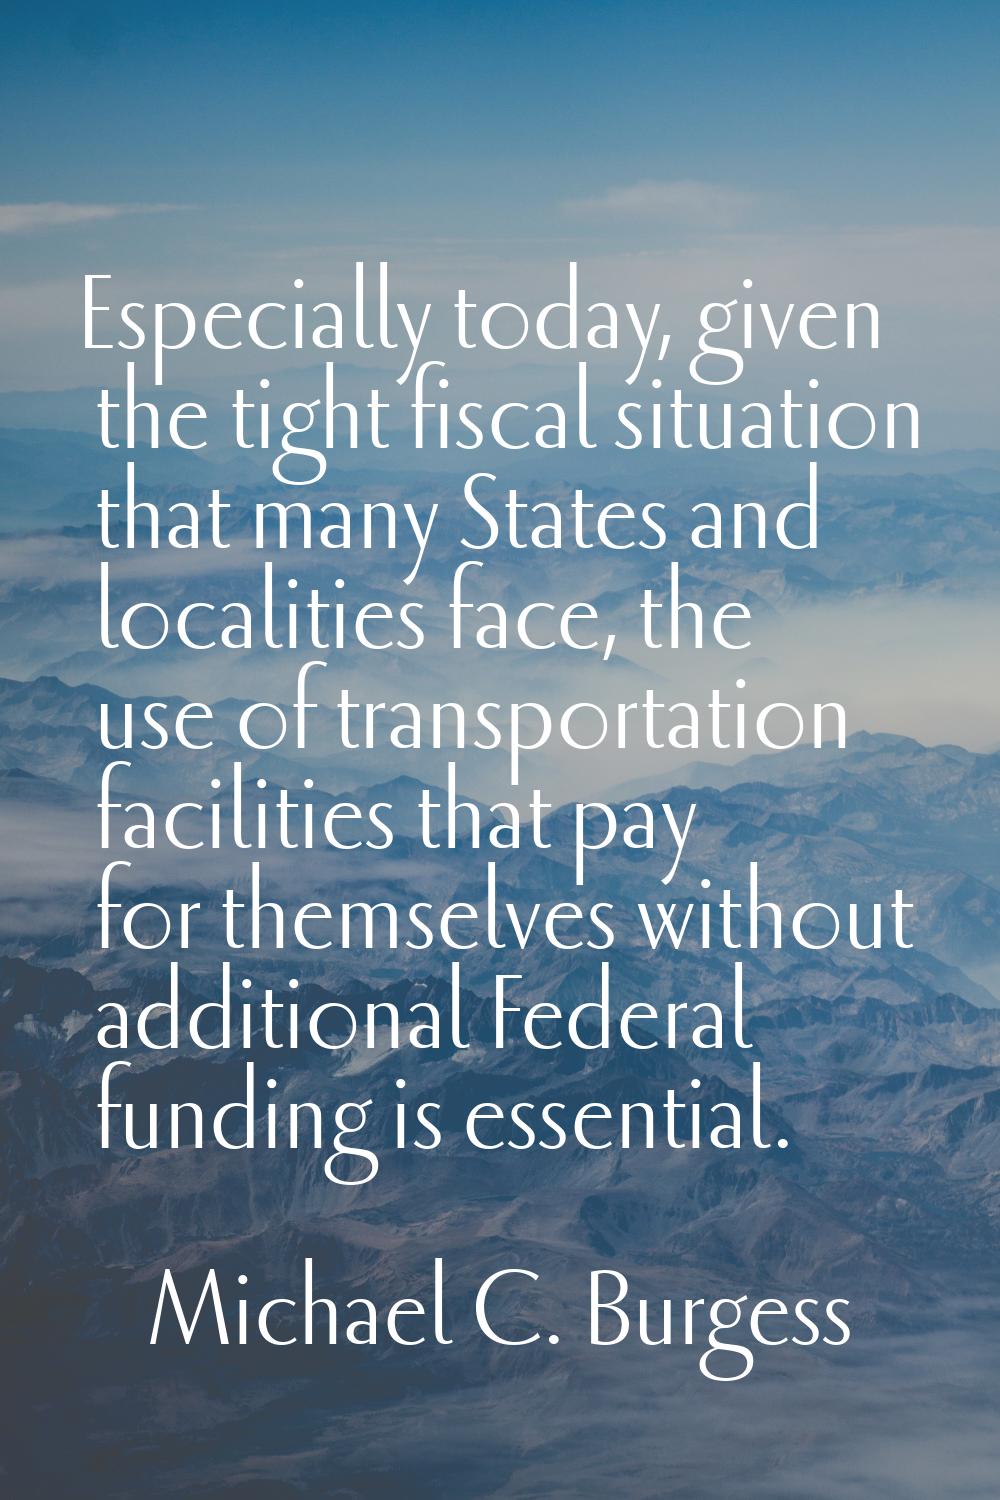 Especially today, given the tight fiscal situation that many States and localities face, the use of